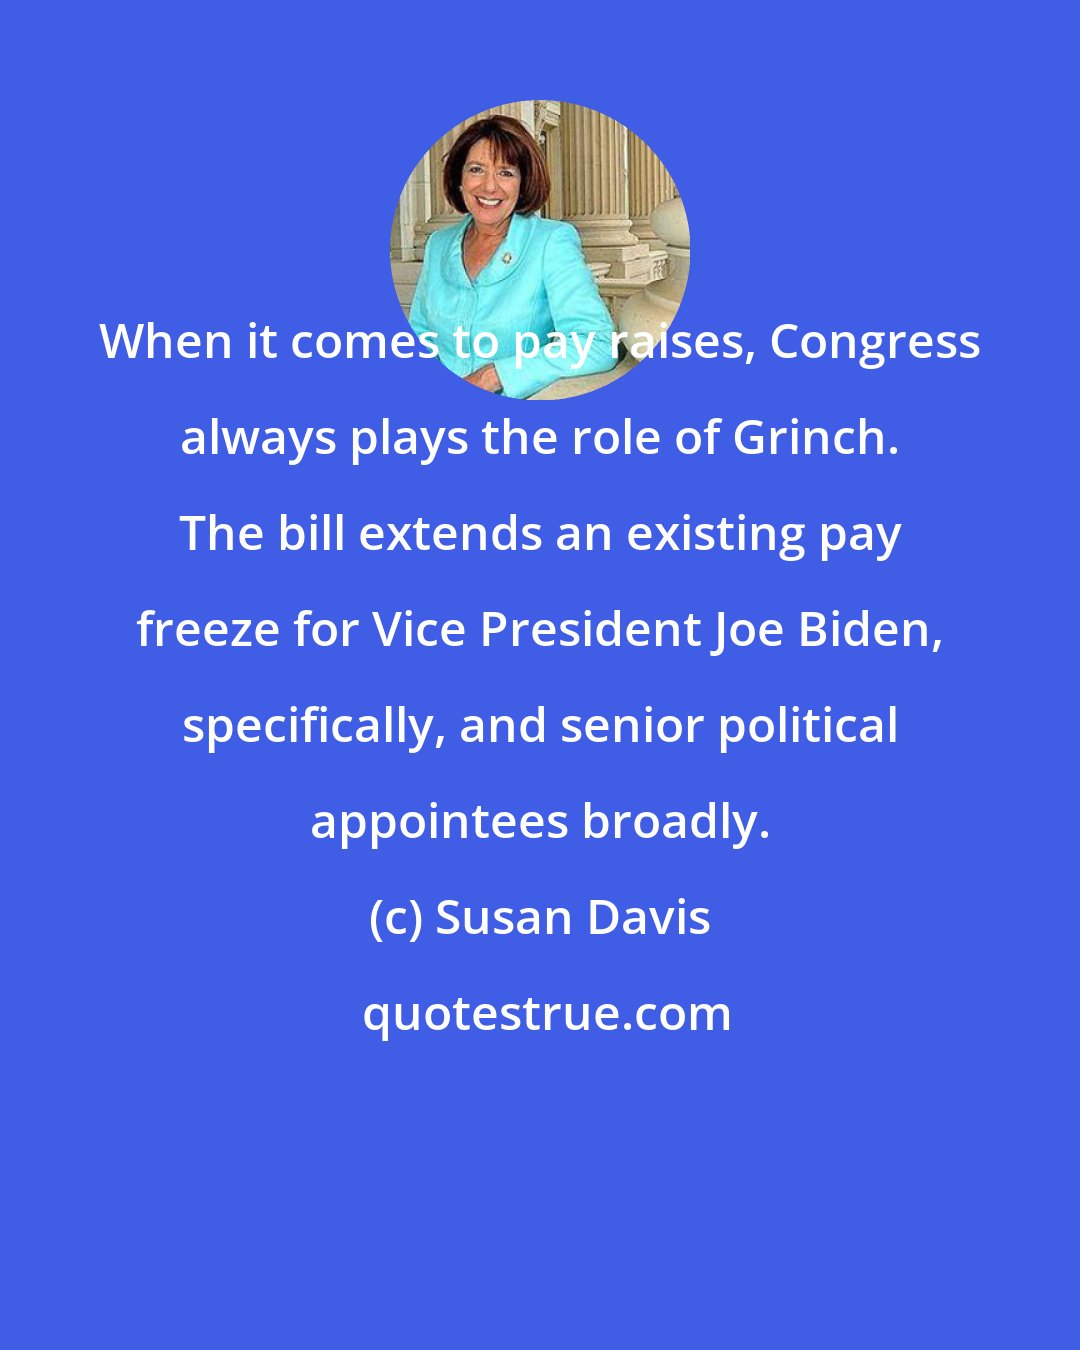 Susan Davis: When it comes to pay raises, Congress always plays the role of Grinch. The bill extends an existing pay freeze for Vice President Joe Biden, specifically, and senior political appointees broadly.